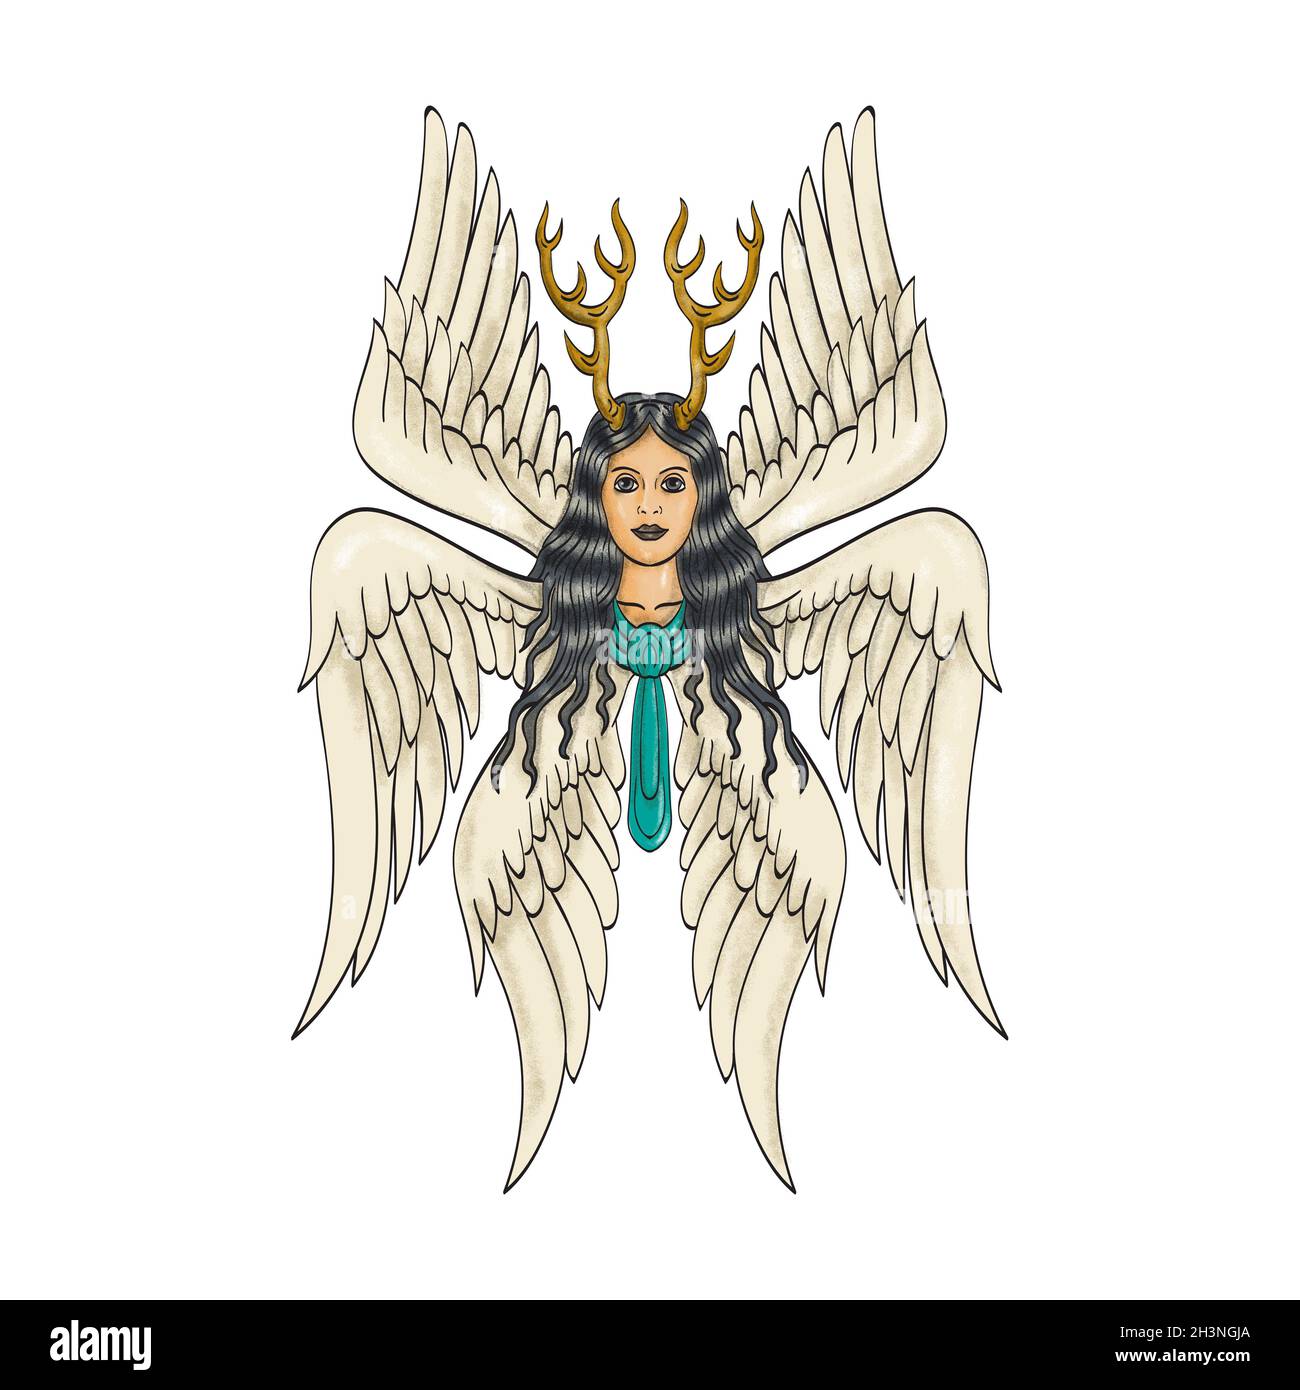 Seraph or Seraphim a Six-Winged Fiery Angel with Six Wings and Deer Antlers Tattoo Style Full Color Stock Photo